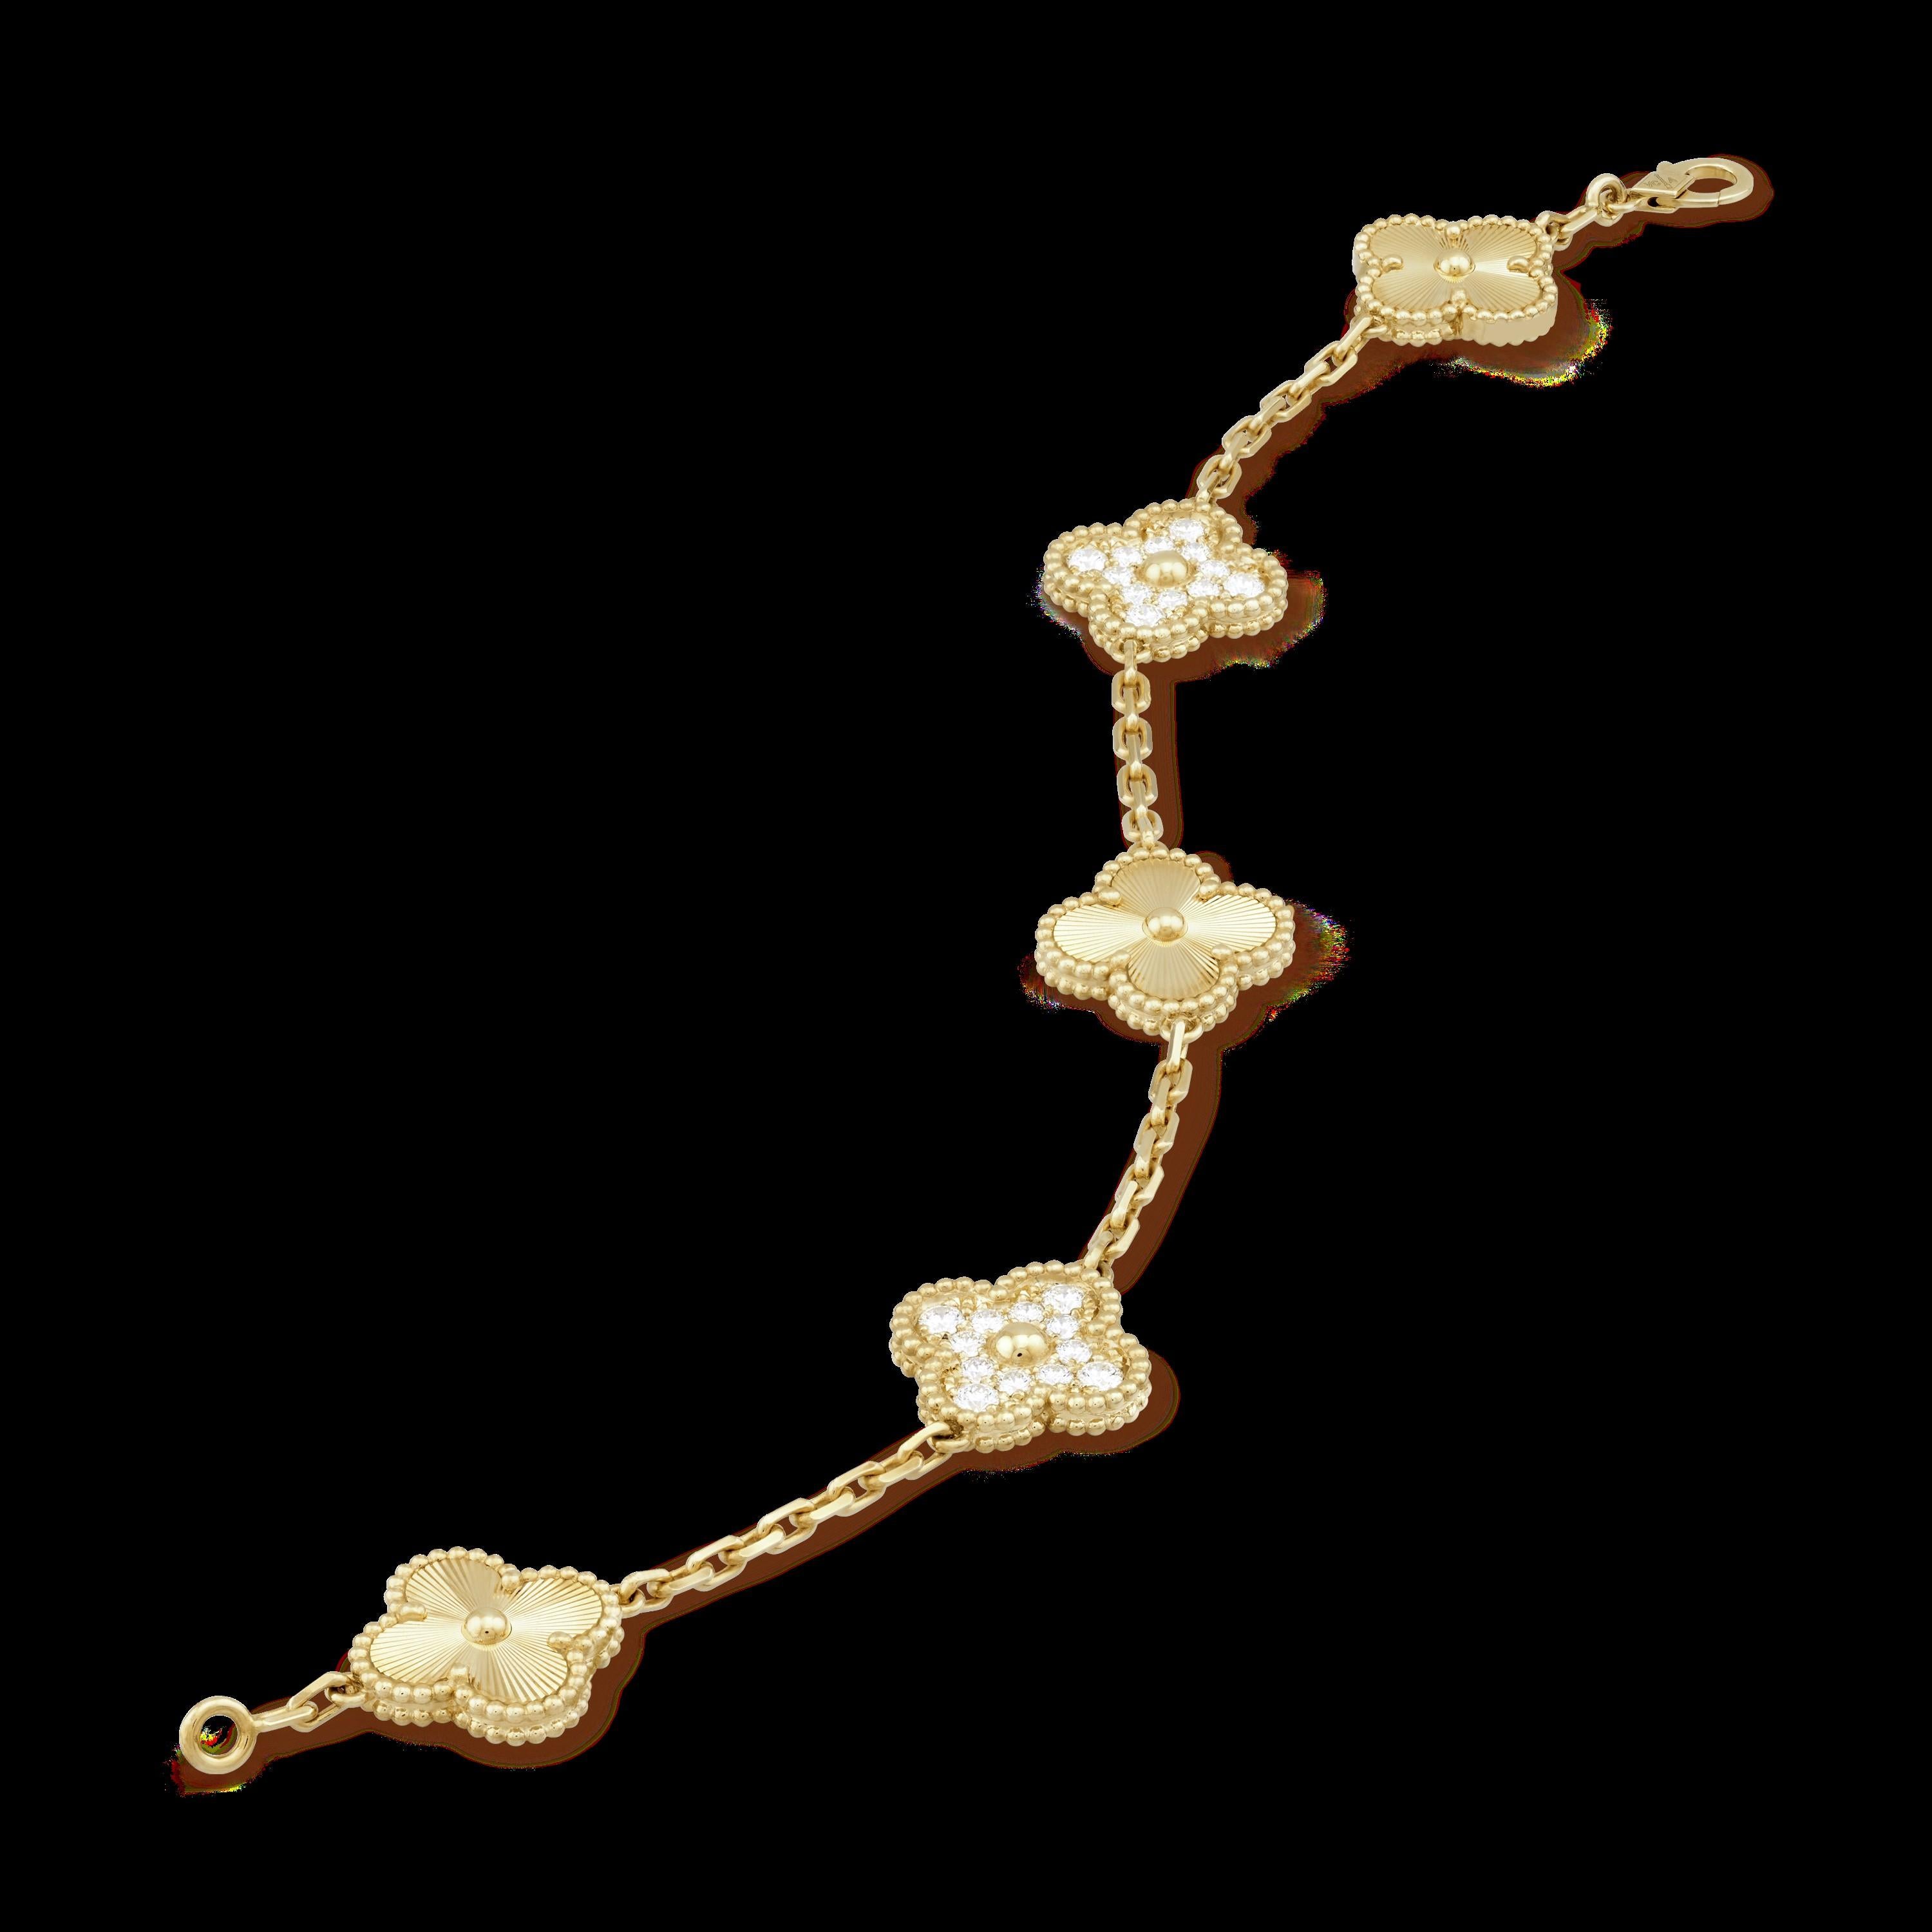 Van Cleef & Arpels Alhambra 5 motif Bracelet with  Diamonds and  18k Yellow Gold
The bracelet is made in 18k yellow gold and set with white diamonds that are D to F color and VS clarity. with 24 pave-set diamonds weighing approximately 1ct total